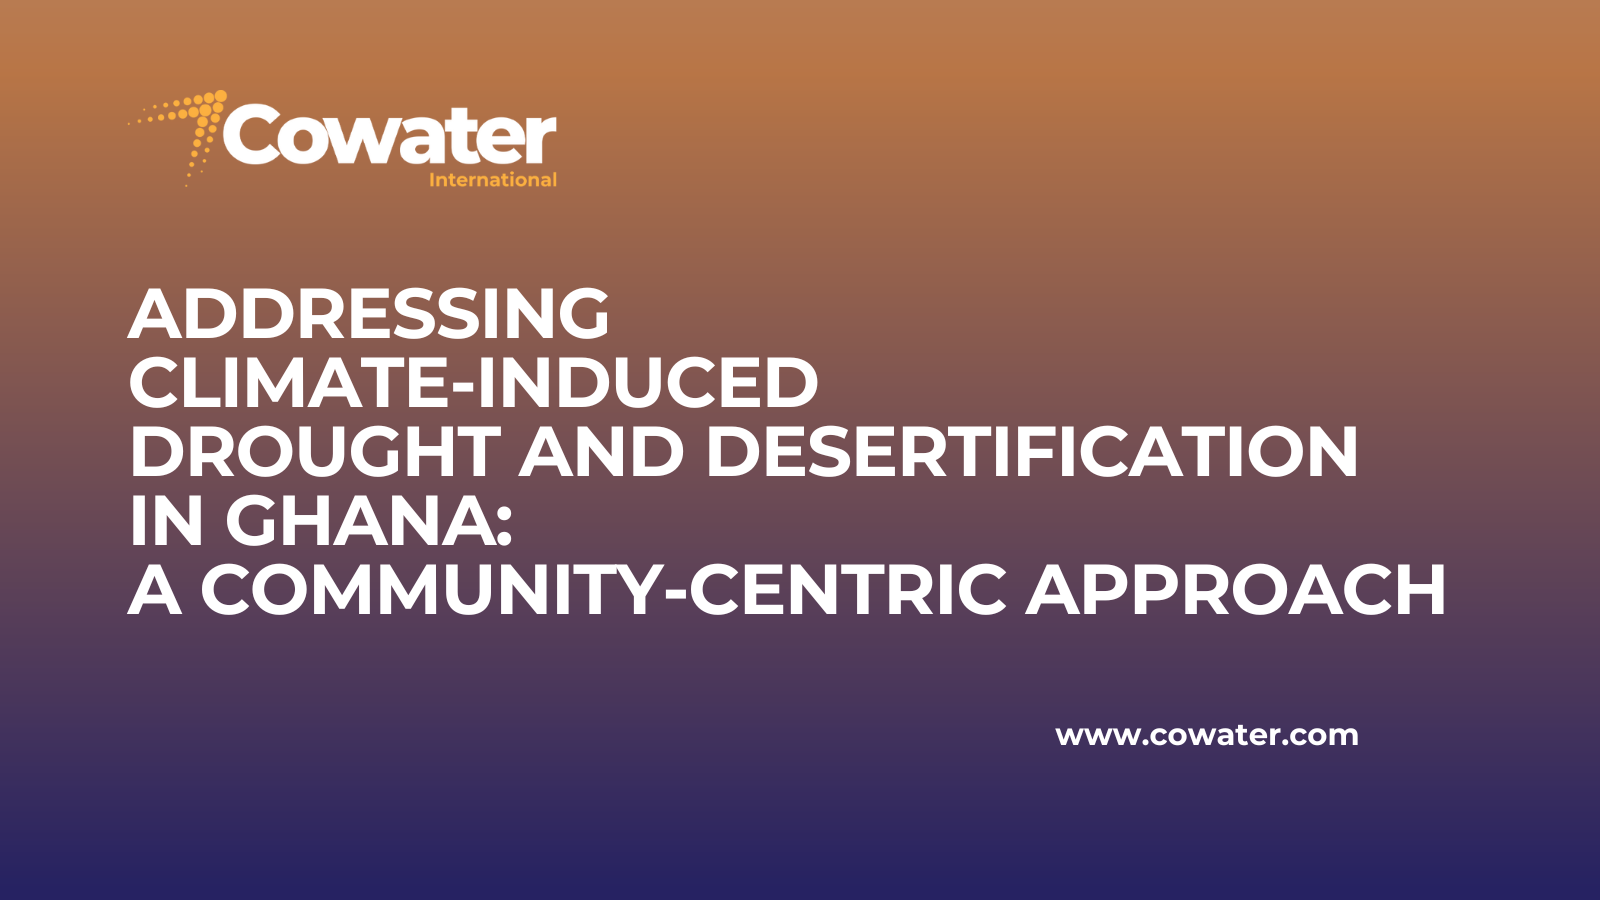 Addressing Climate-Induced Drought and Desertification in Ghana: A Community-Centric Approach